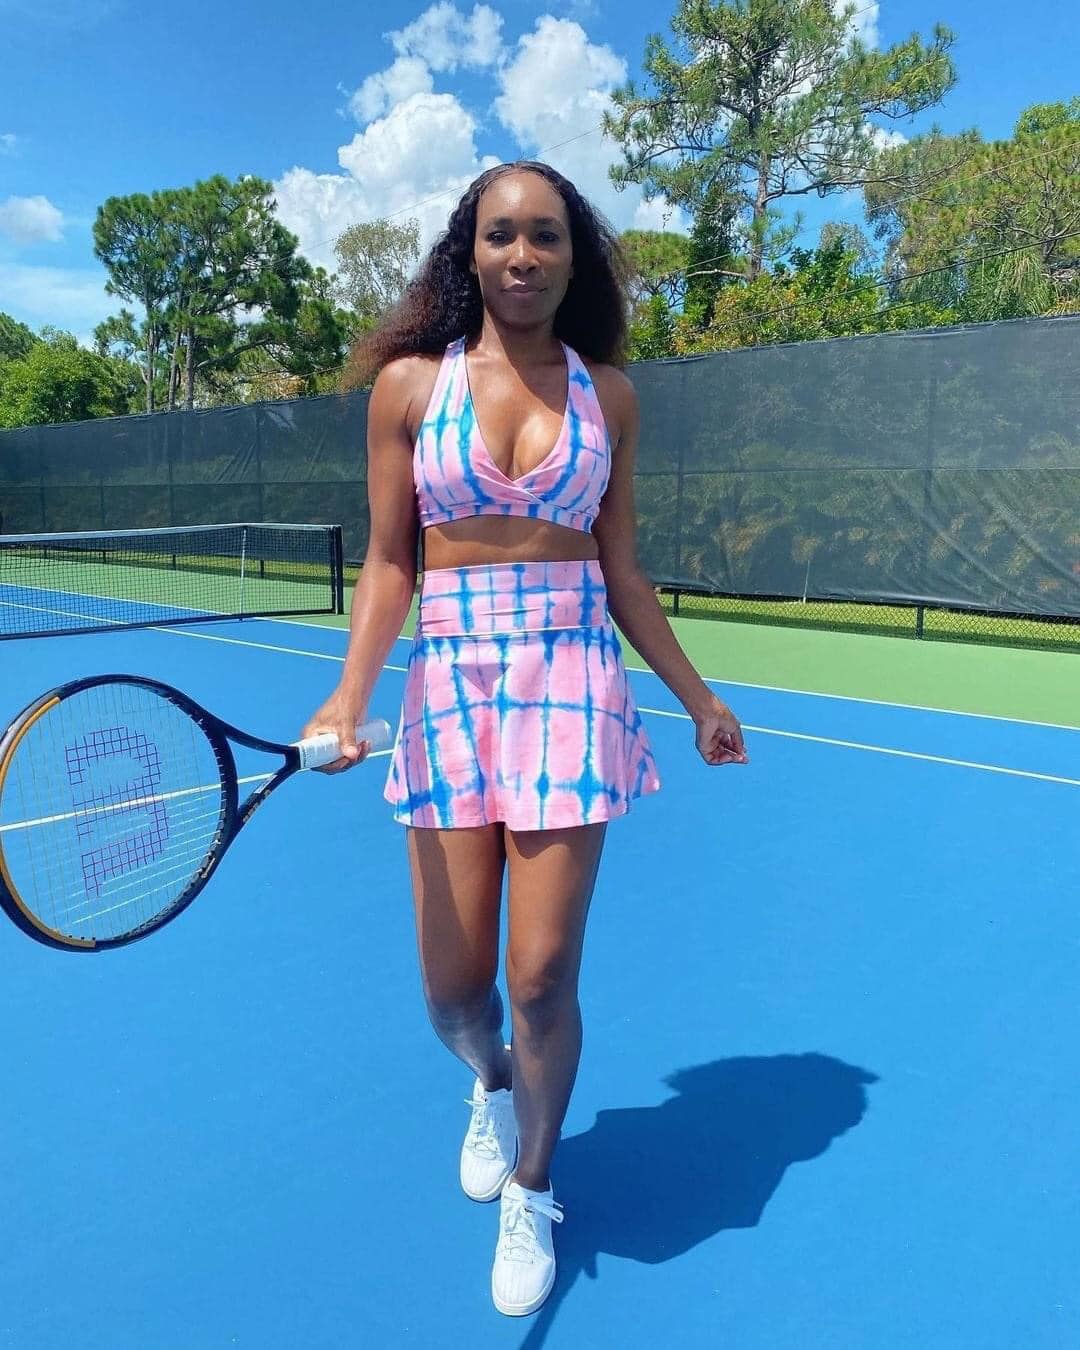 Venus Williams about her relationship life